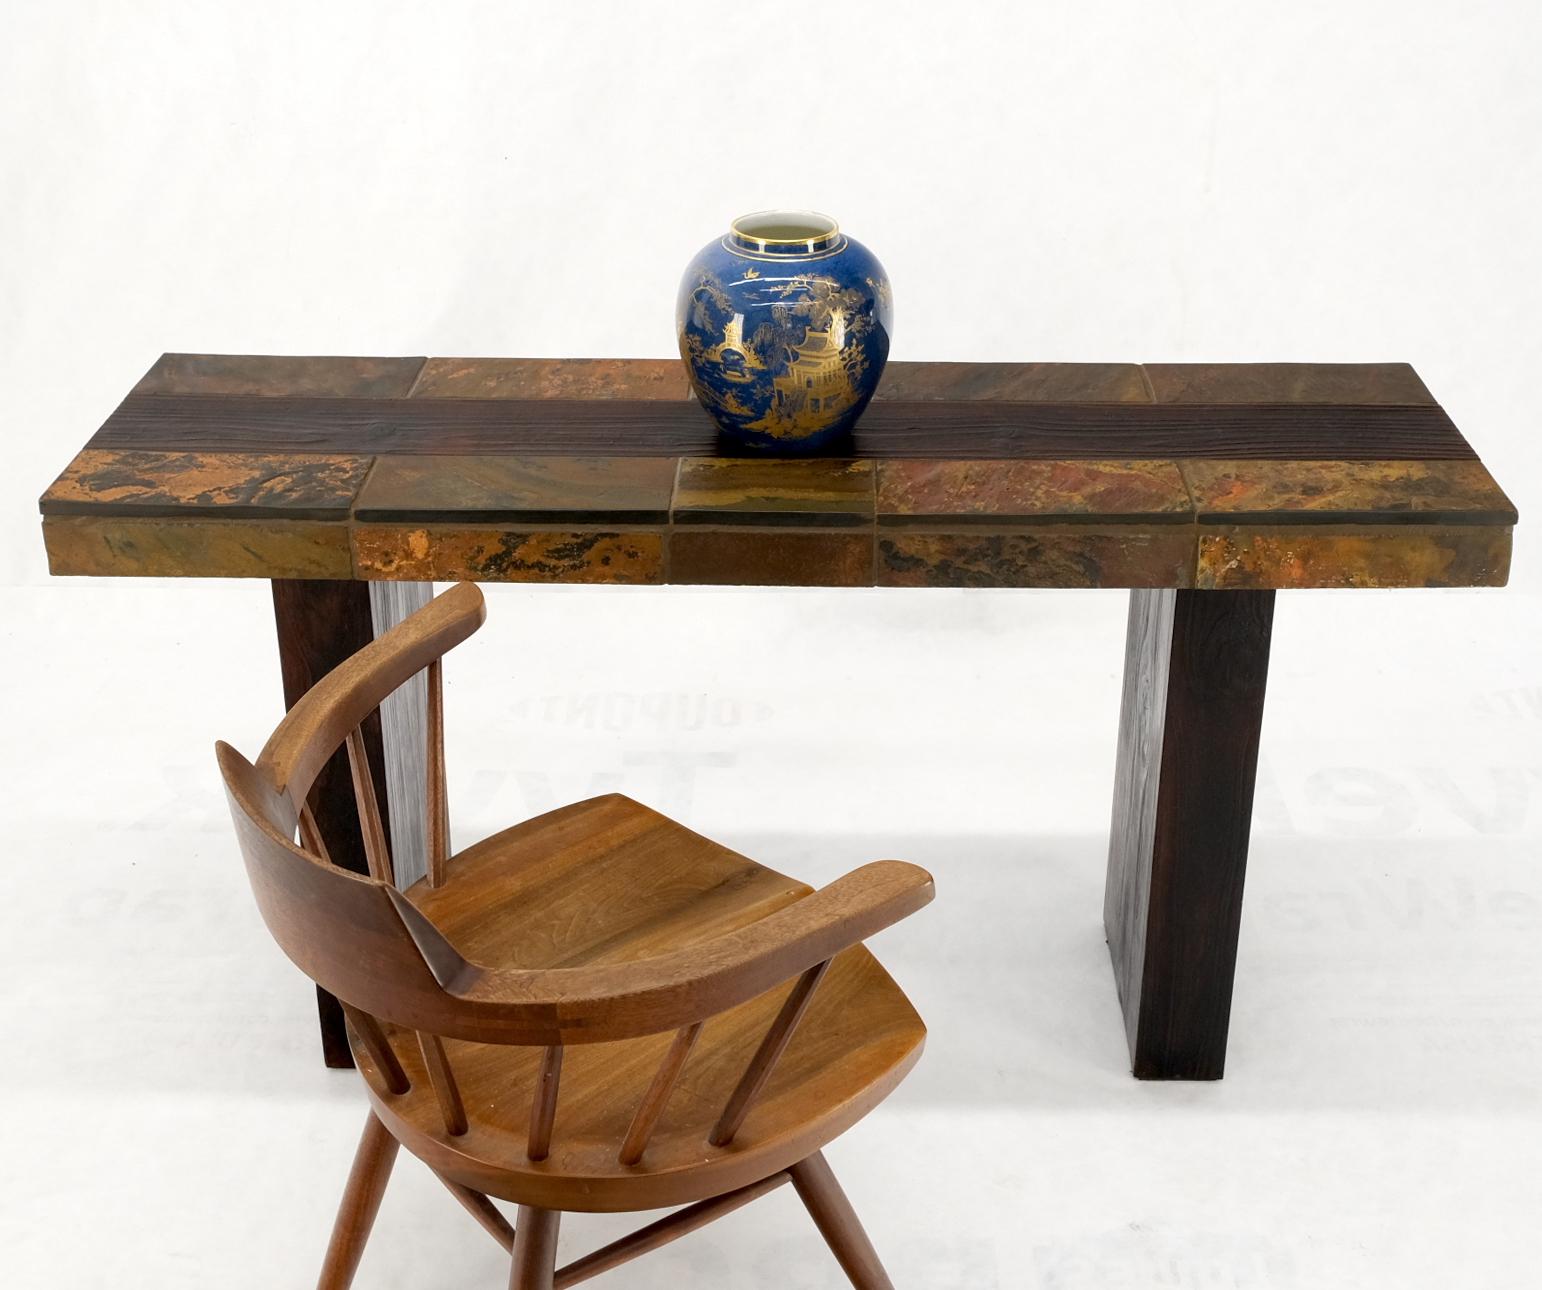 20th Century Exotic Rustic Wood & Stone Tile Mid-Century Modern Console Sofa Table For Sale